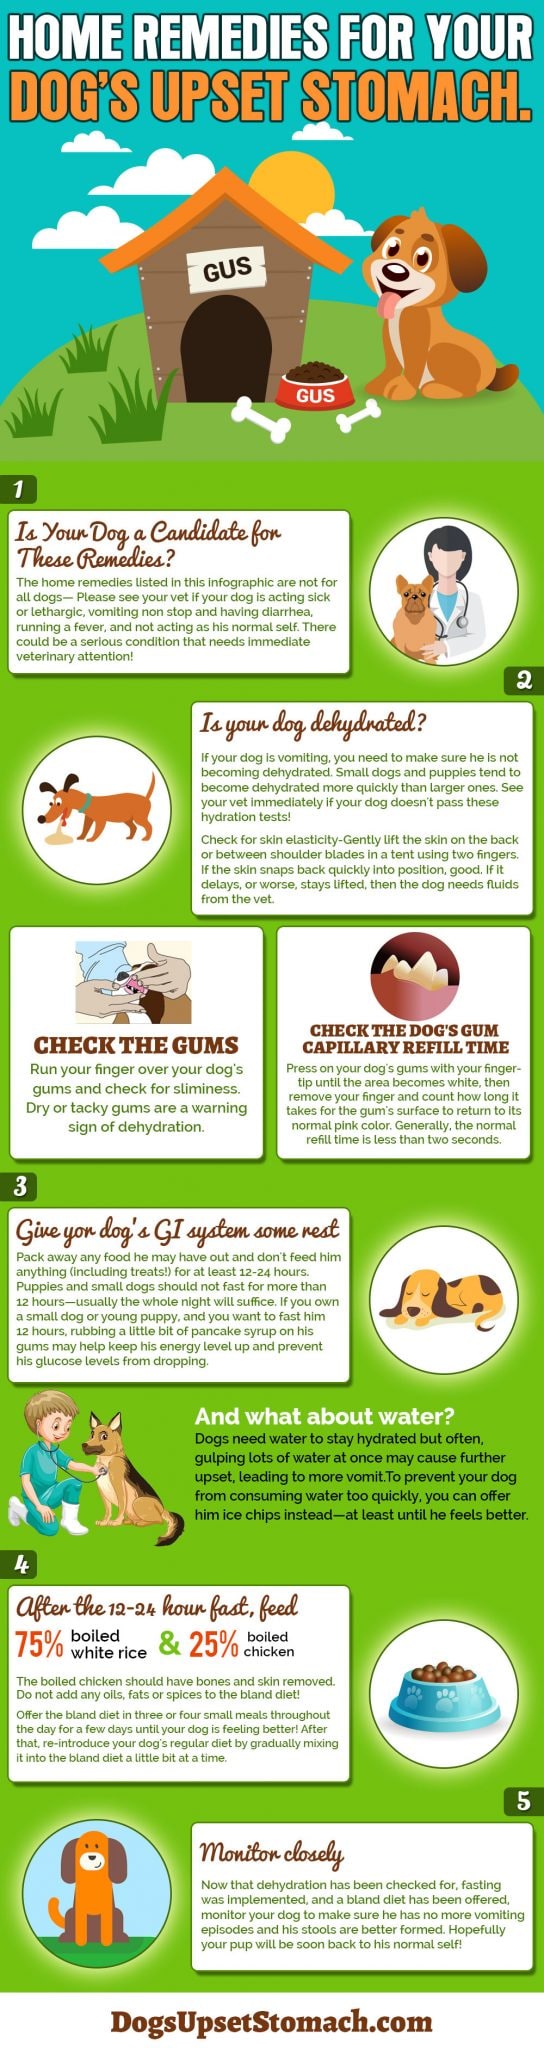 home-remedies-for-dogs-vomiting-dog-discoveries